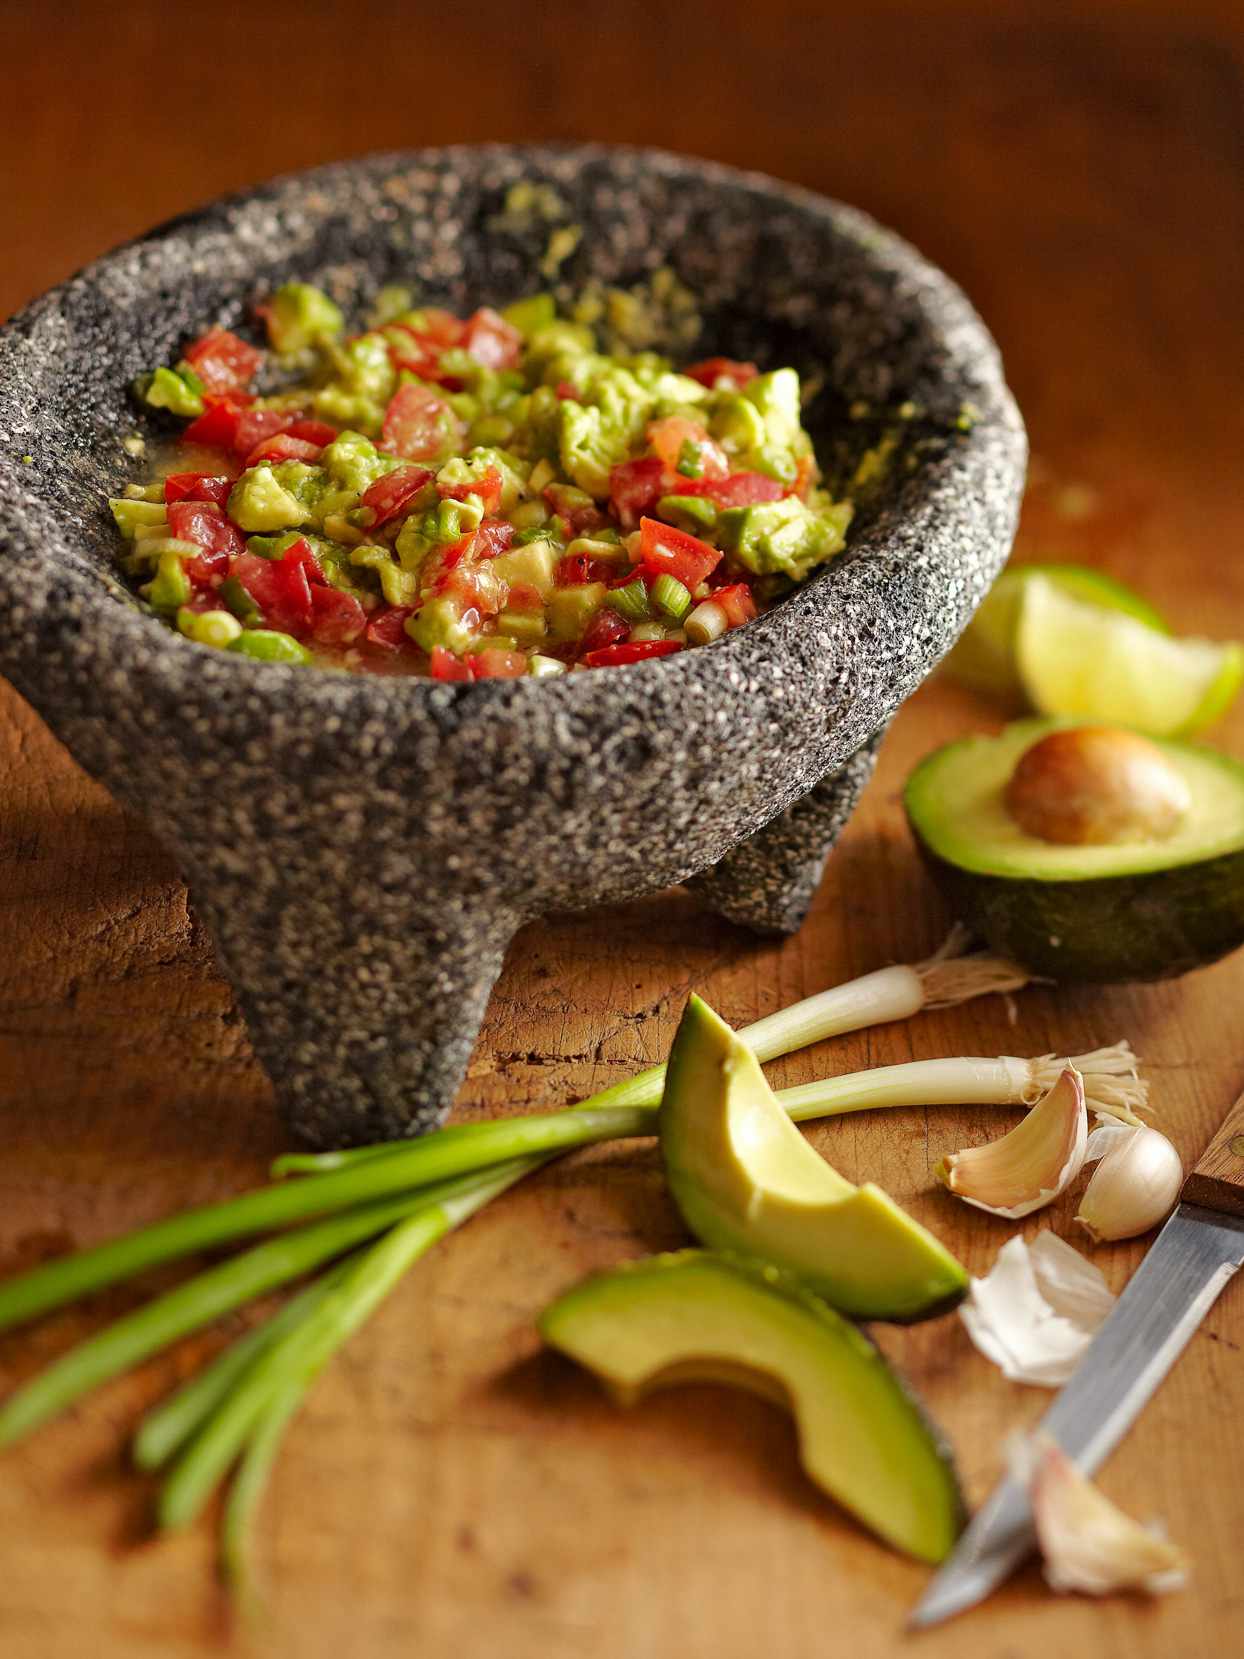 Chunky Guacamole in stone bowl with sliced avocados and garlic cloves